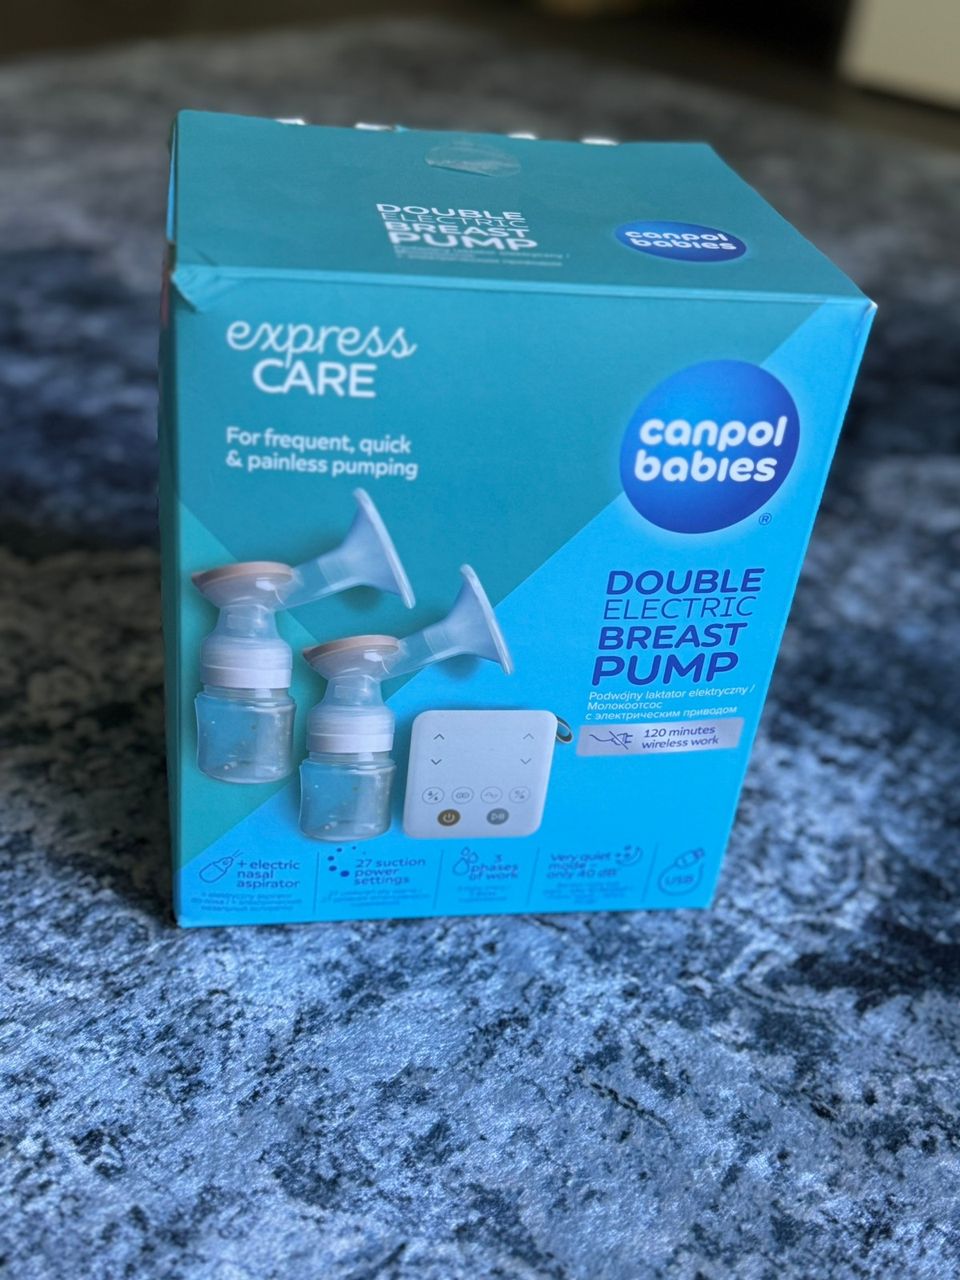 Canpol babies double electric breast pump